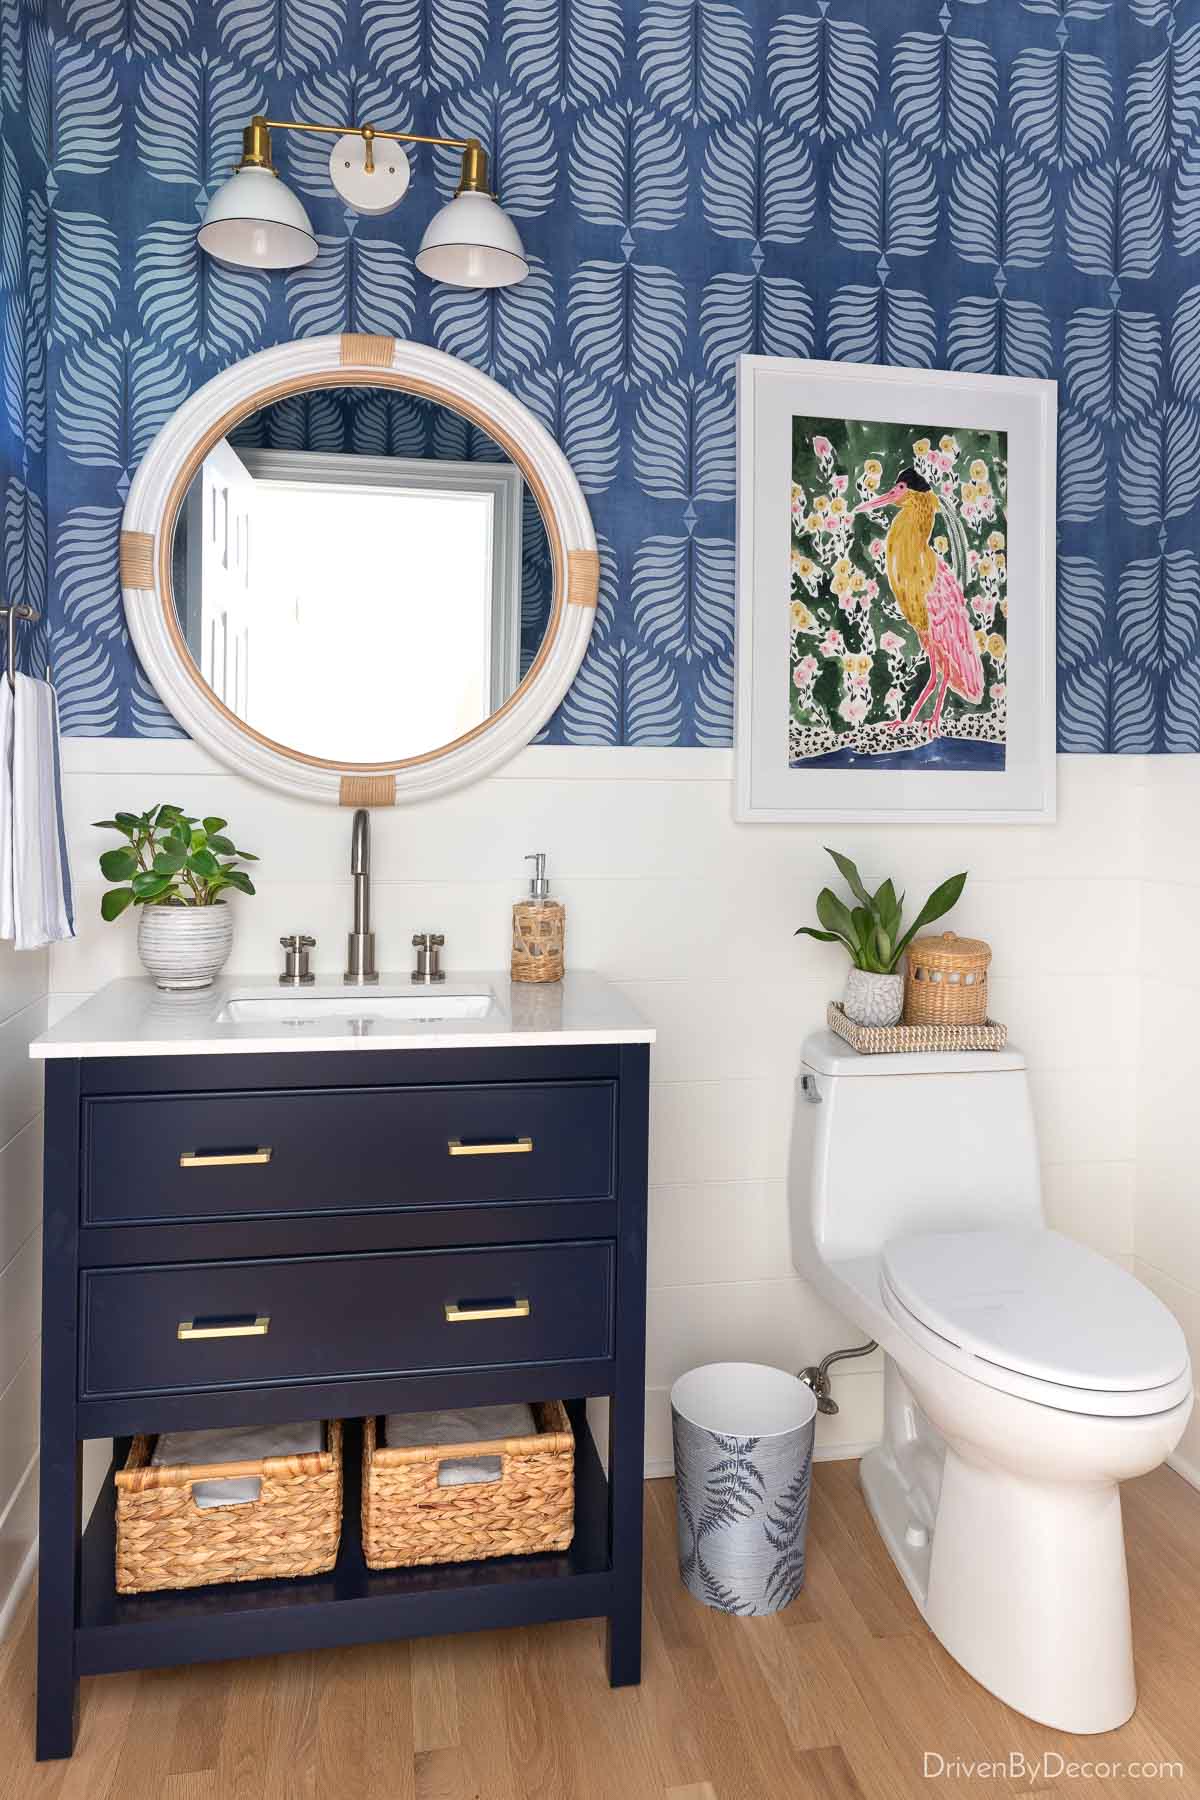 Show how high to hang art over a toilet in a powder room